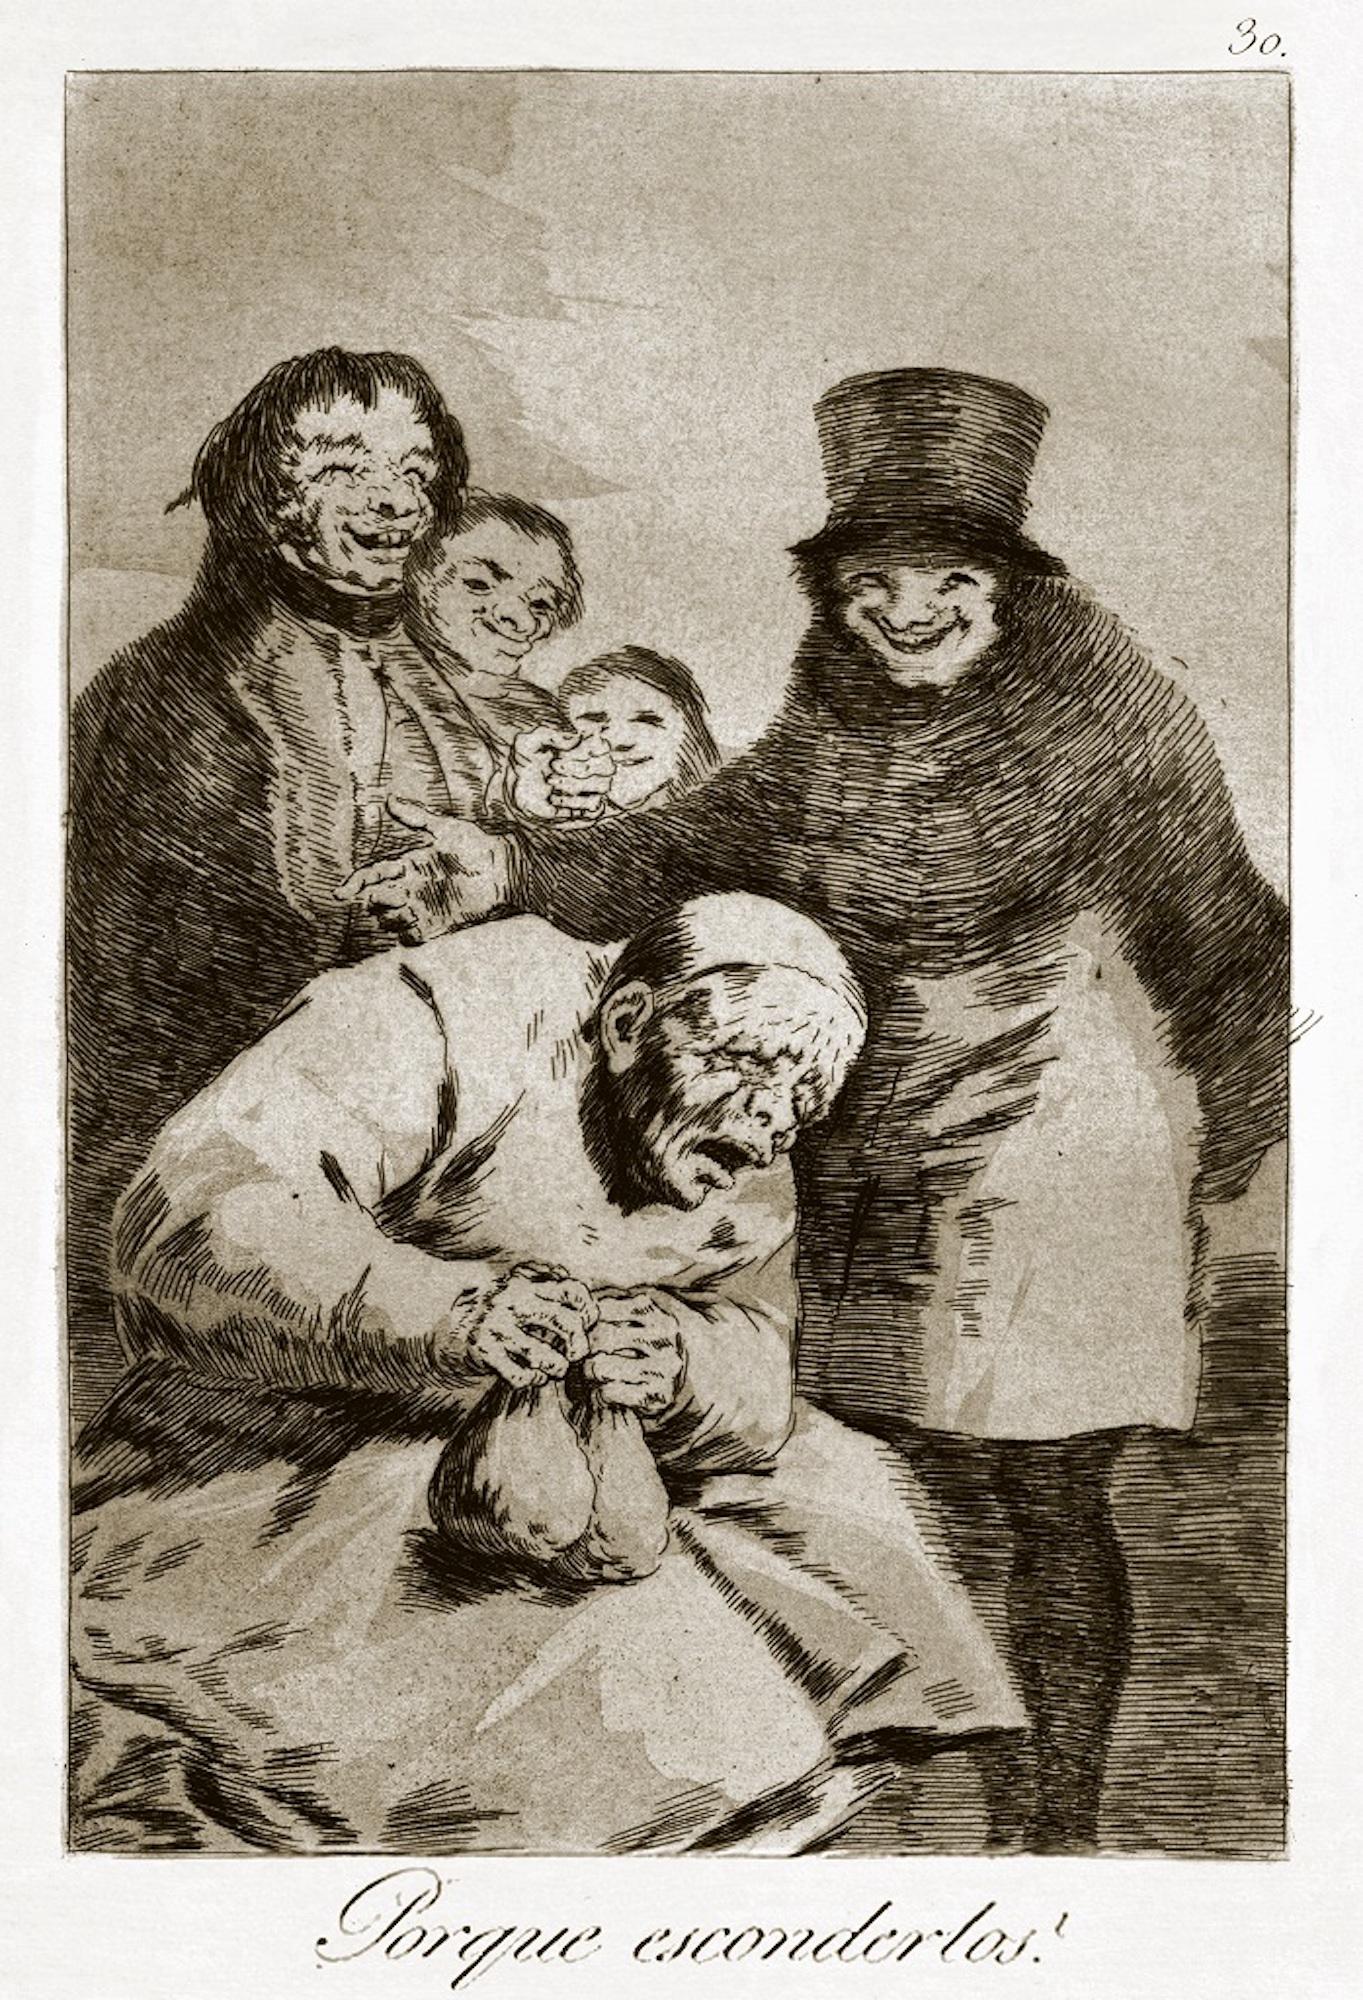 ¿Por qué esconderlos? is an original etching realized by the great Spanish artist Francisco Goya and published for the first time in 1799.

Etching on wove paper.

The plate is part of the Third Edition of "Los Caprichos" that has been published in